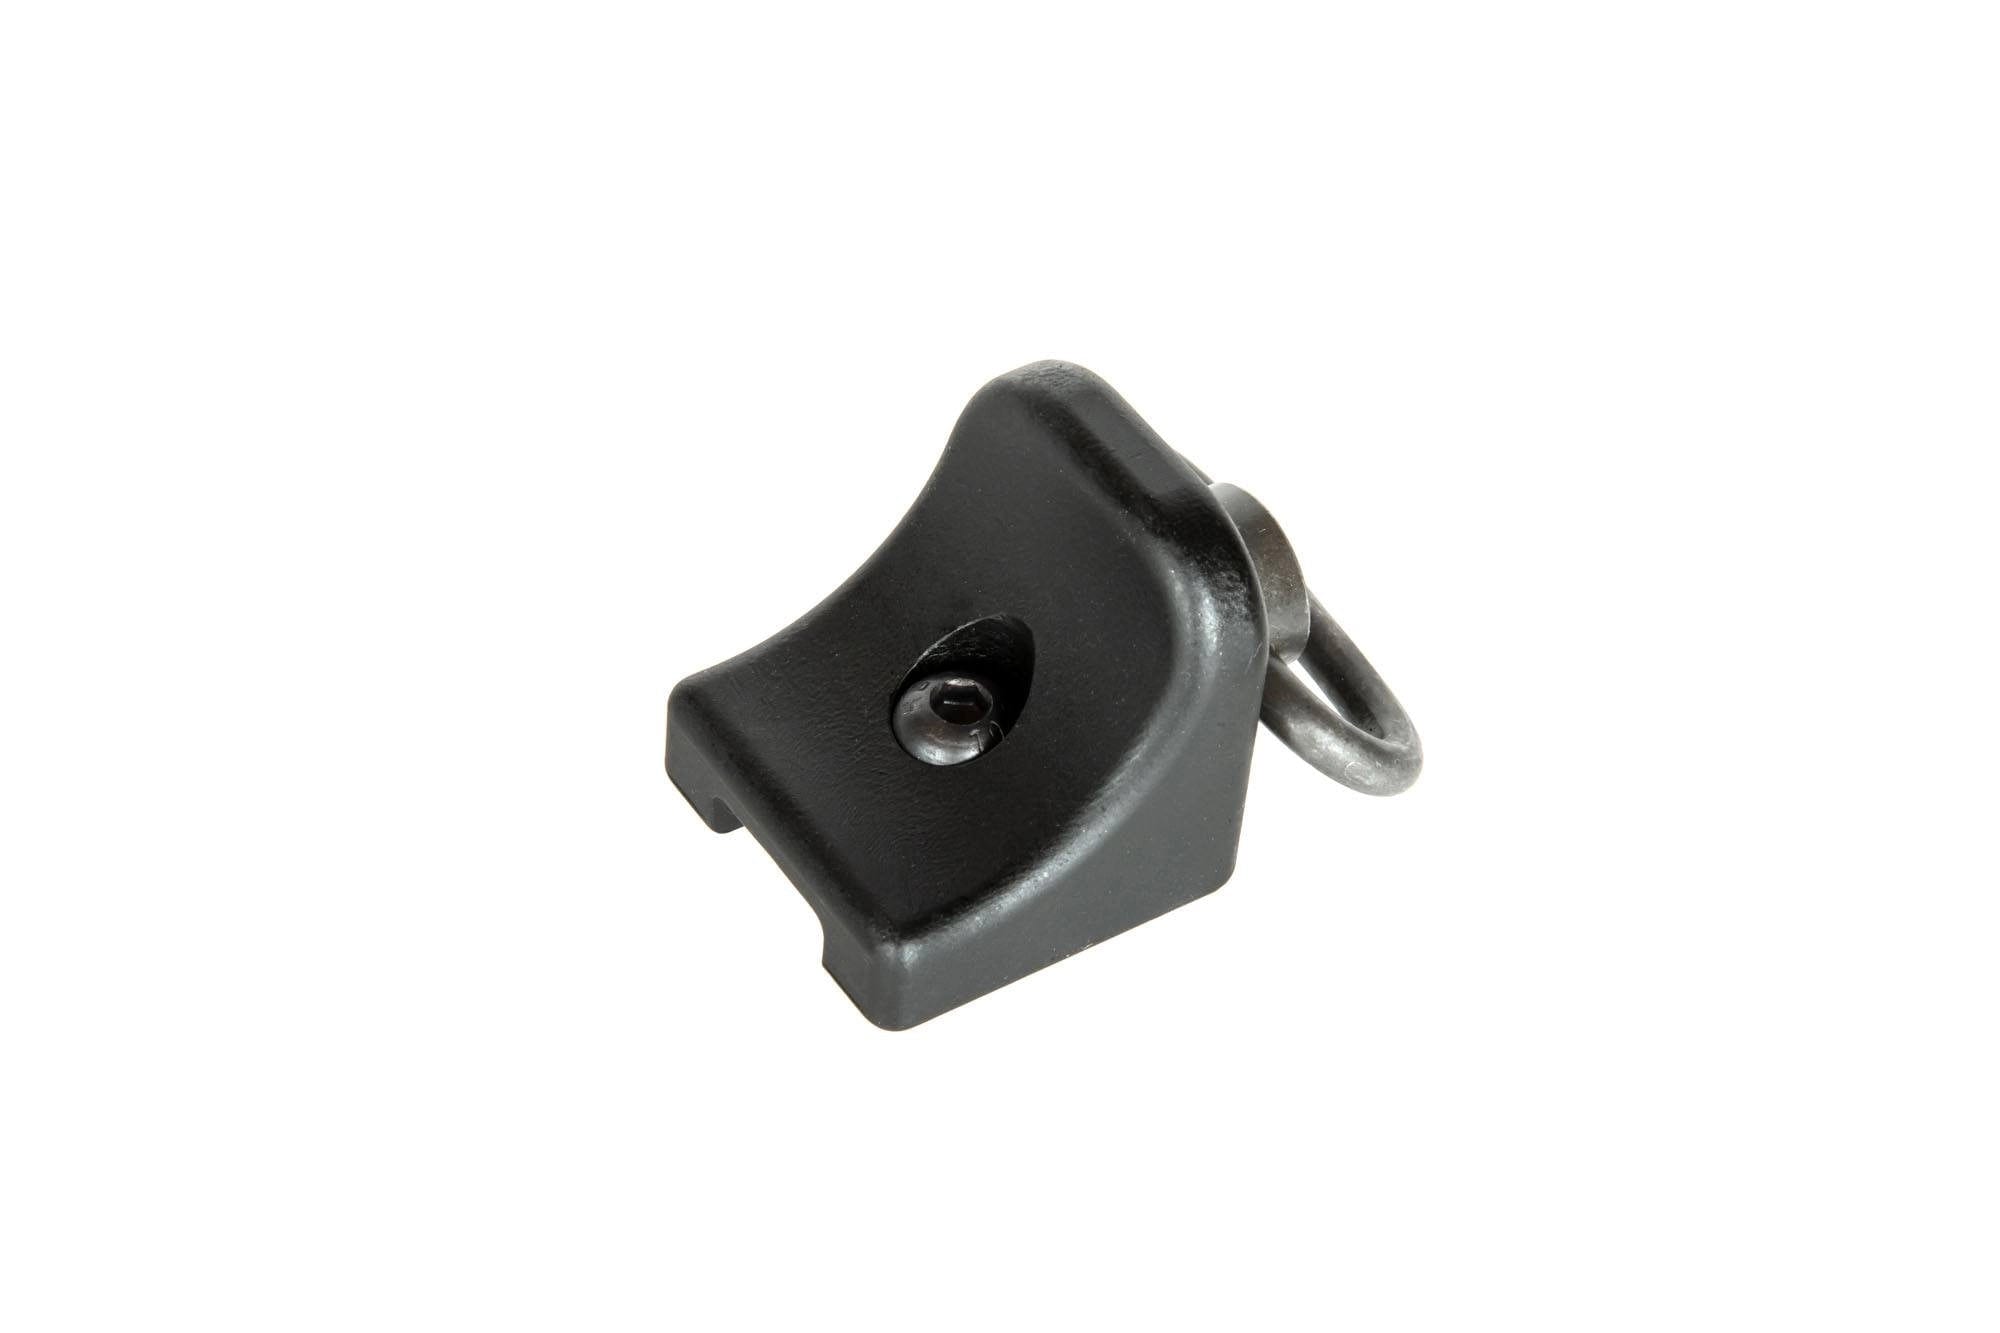 Hand-Stop with QD Sling Mount for URX III Rails